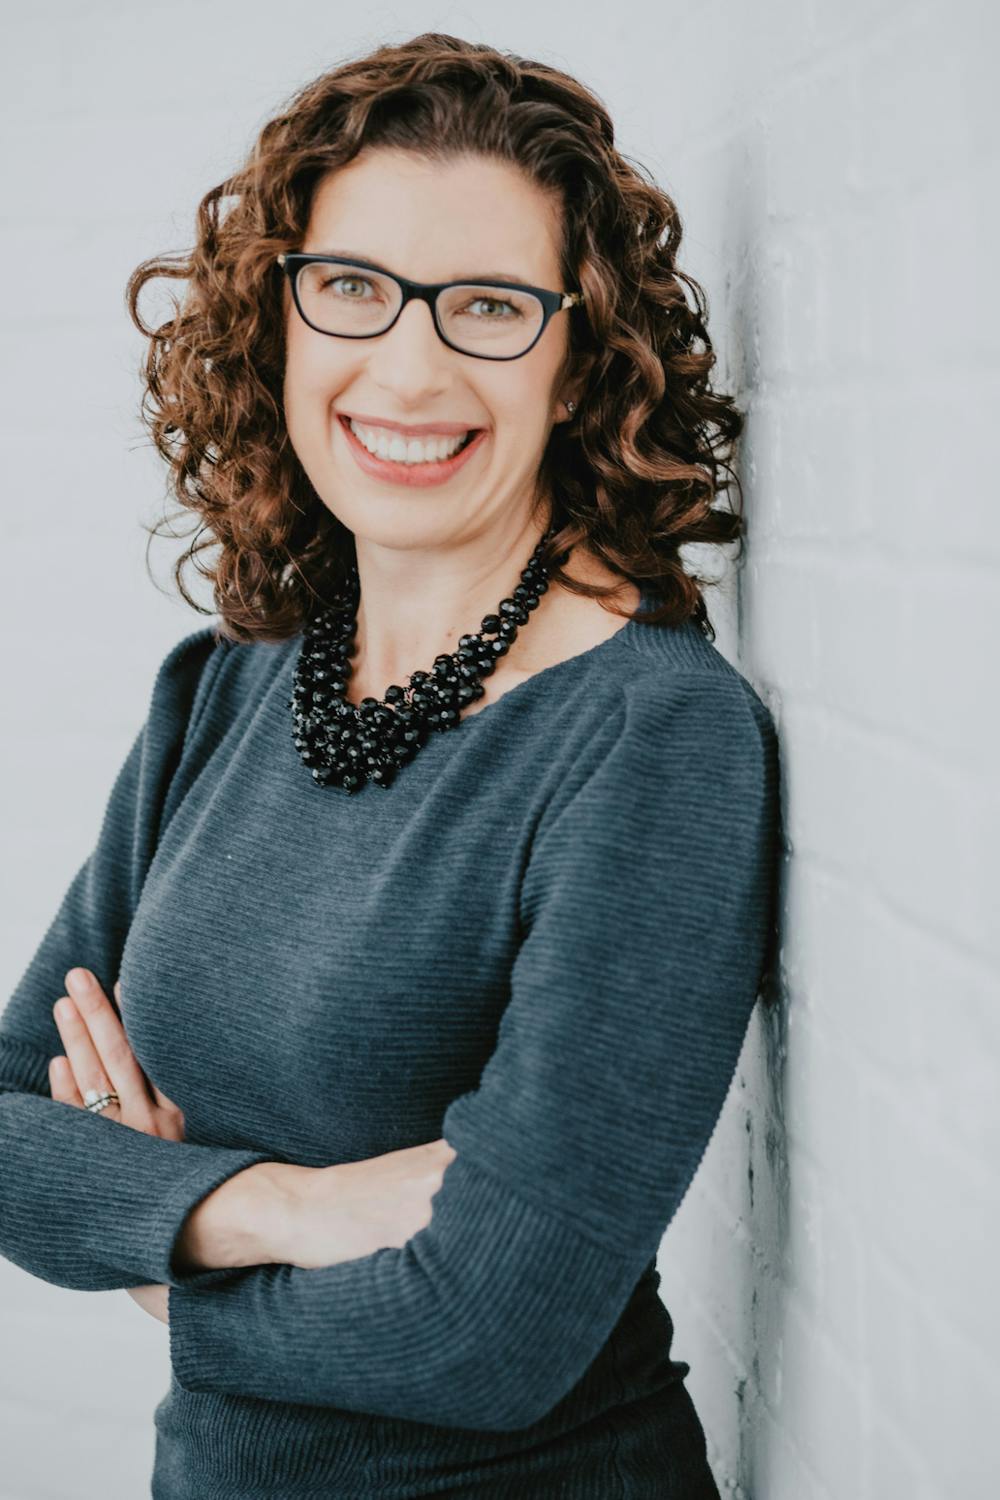 <p>Megan Ranney previously worked with the National Academy of Medicine on initiatives surrounding science communication, COVID-19 and firearm injury violence prevention.</p><p>Courtesy of Megan Ranney﻿</p>